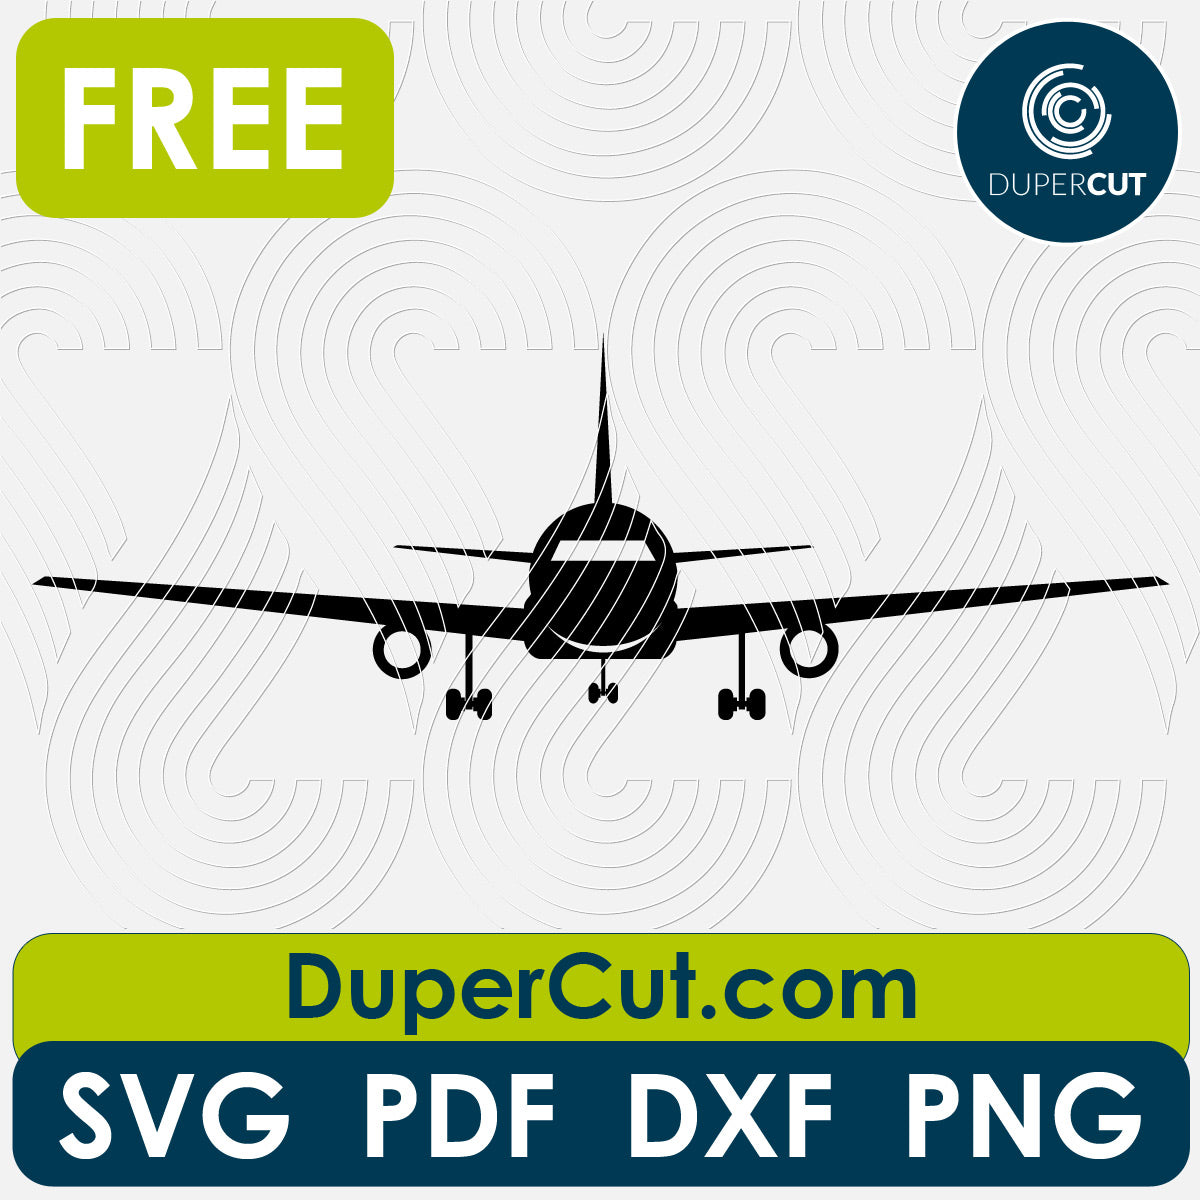 Airplane front silhouette - free cutting files SVG DXF vector template for laser cutting and engraving. For Glowforge, Cricut, Silhouette, scroll saw, cnc plasma machines by DuperCut